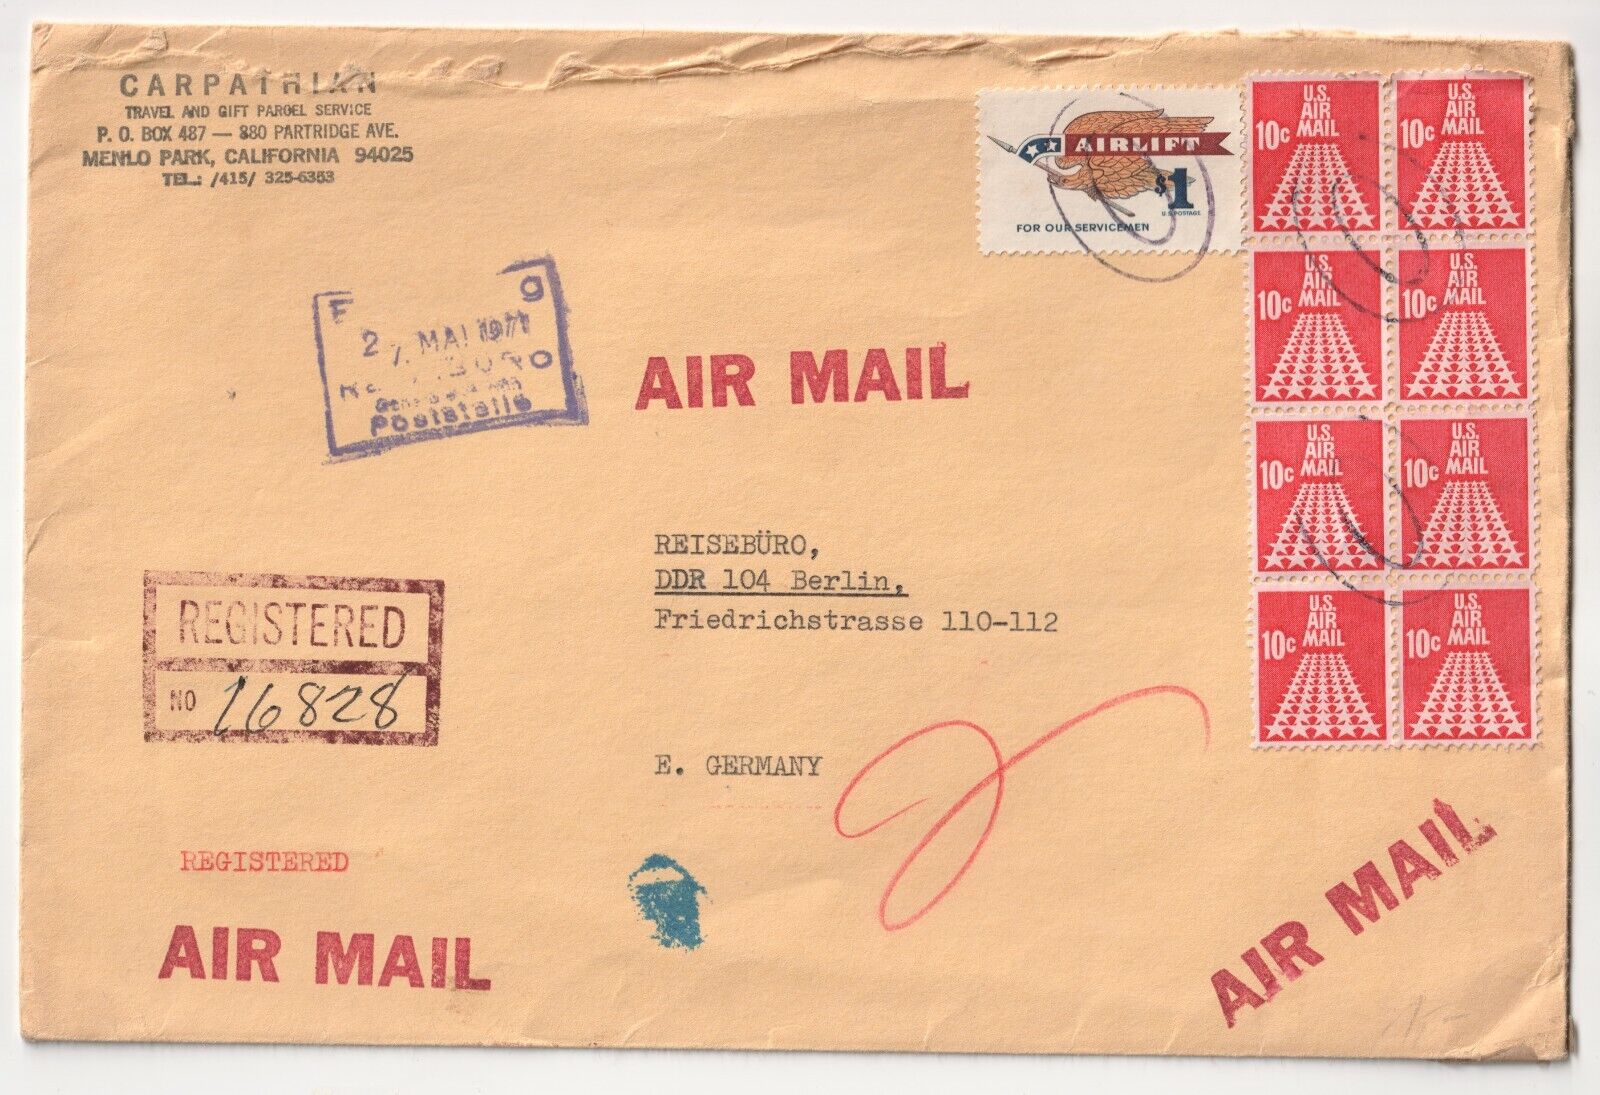 US 1971 AIRLIFT franking registered airmail cover to Germany